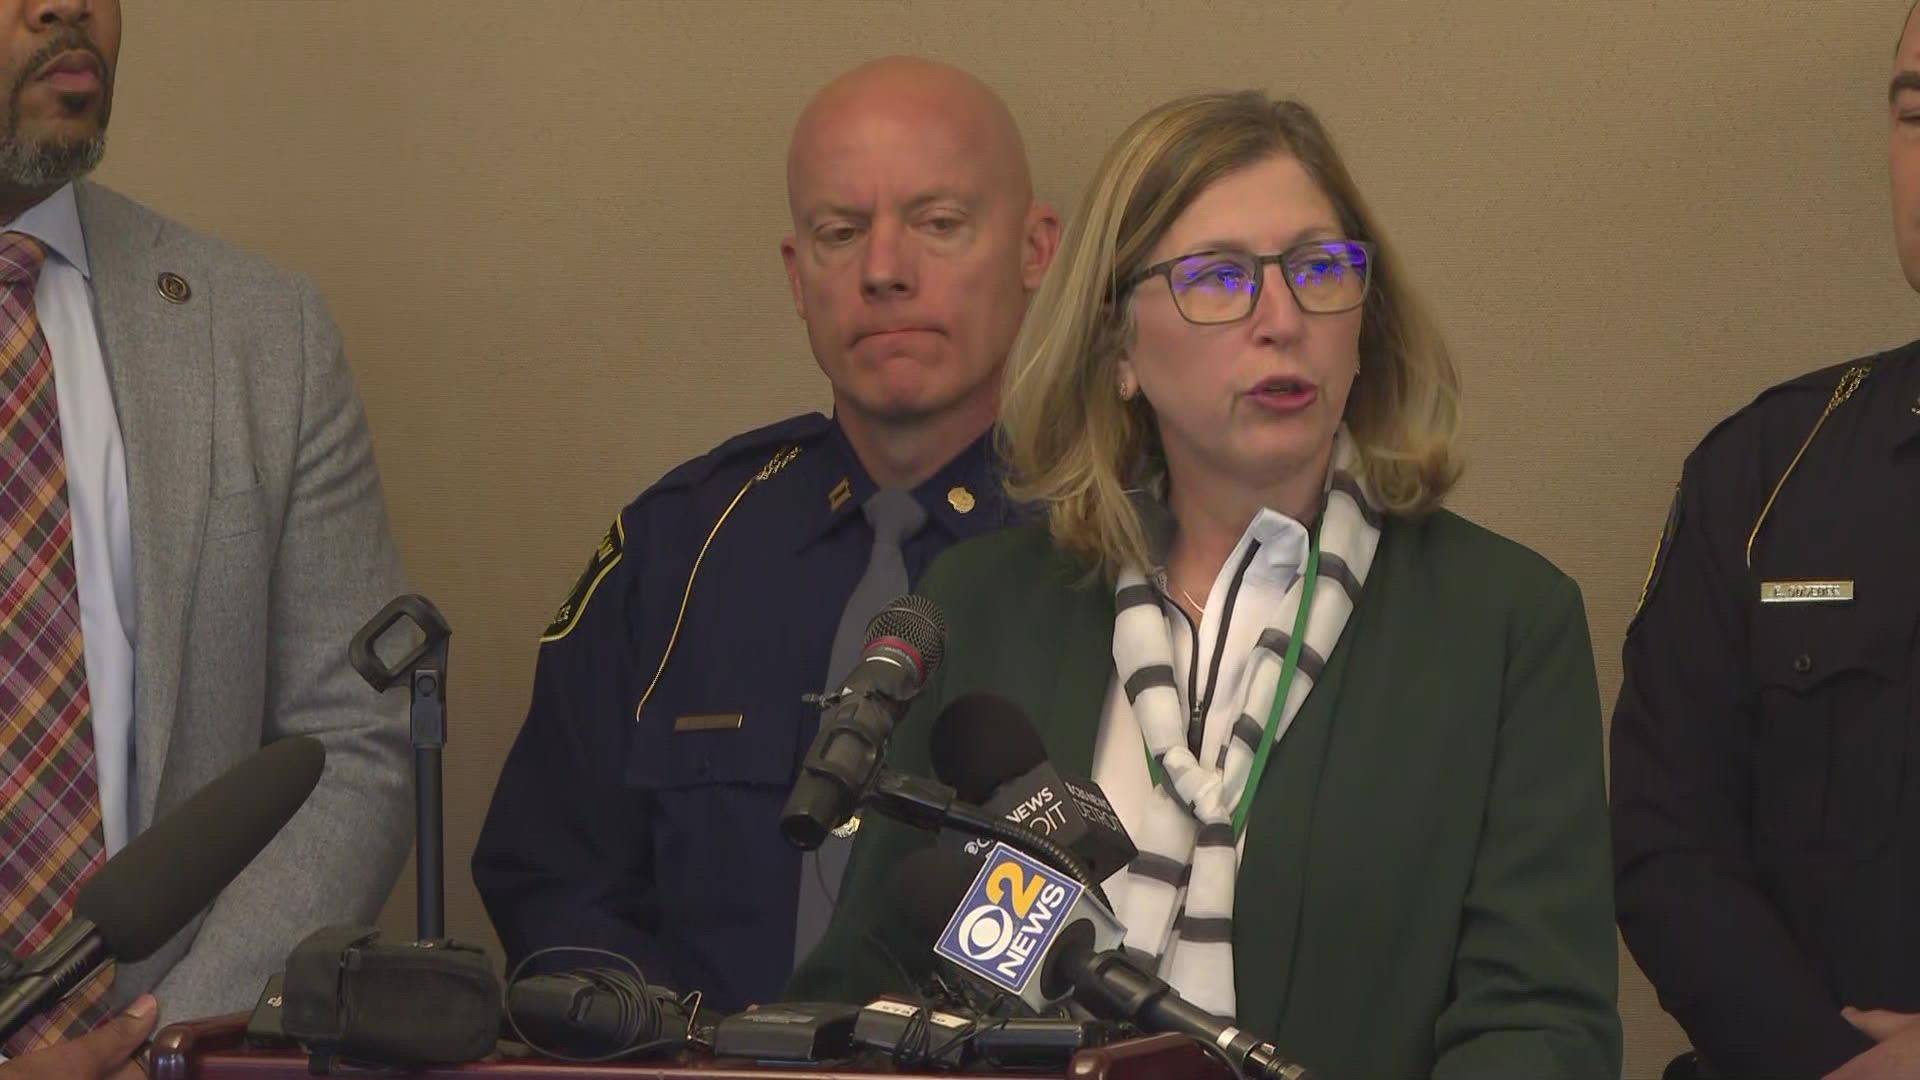 MSU Interim President Teresa K. Woodruff, Ph.D. shared an emotional message to the students, families and the community after the deadly on-campus shooting.